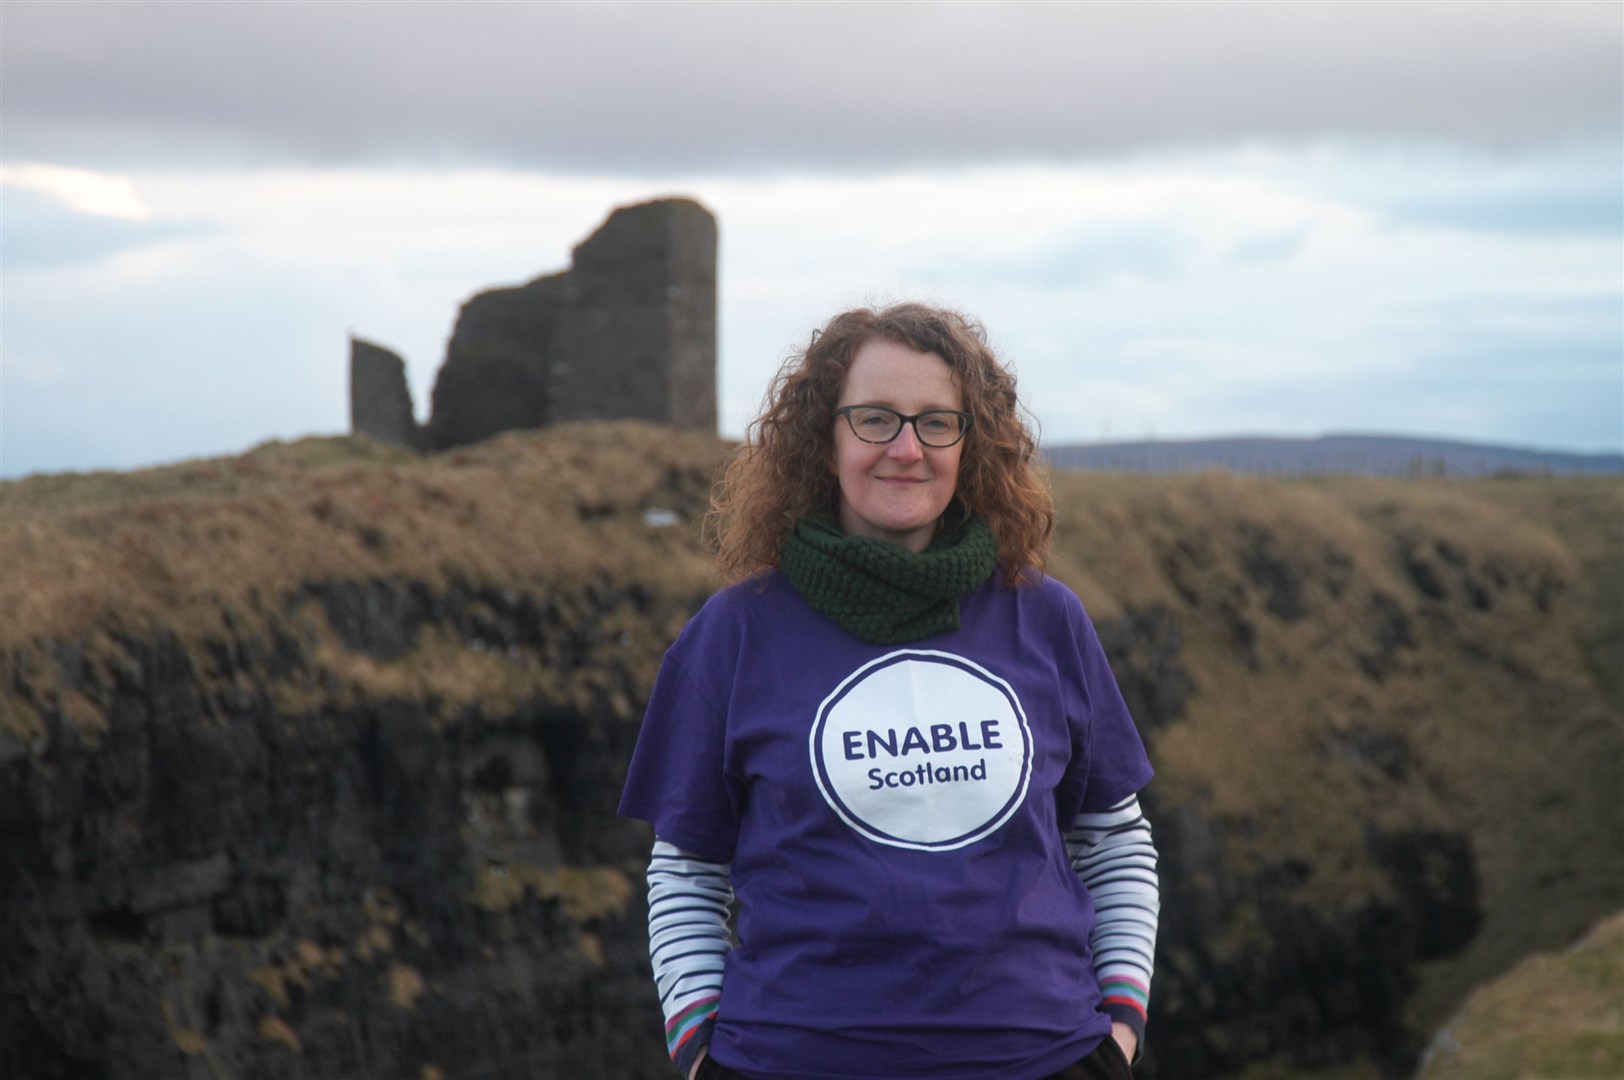 Karen Haden-Homer with the Castle of Old Wick in the background. She was taking part in a Virtual Kiltwalk to raise funds for Enable Scotland.